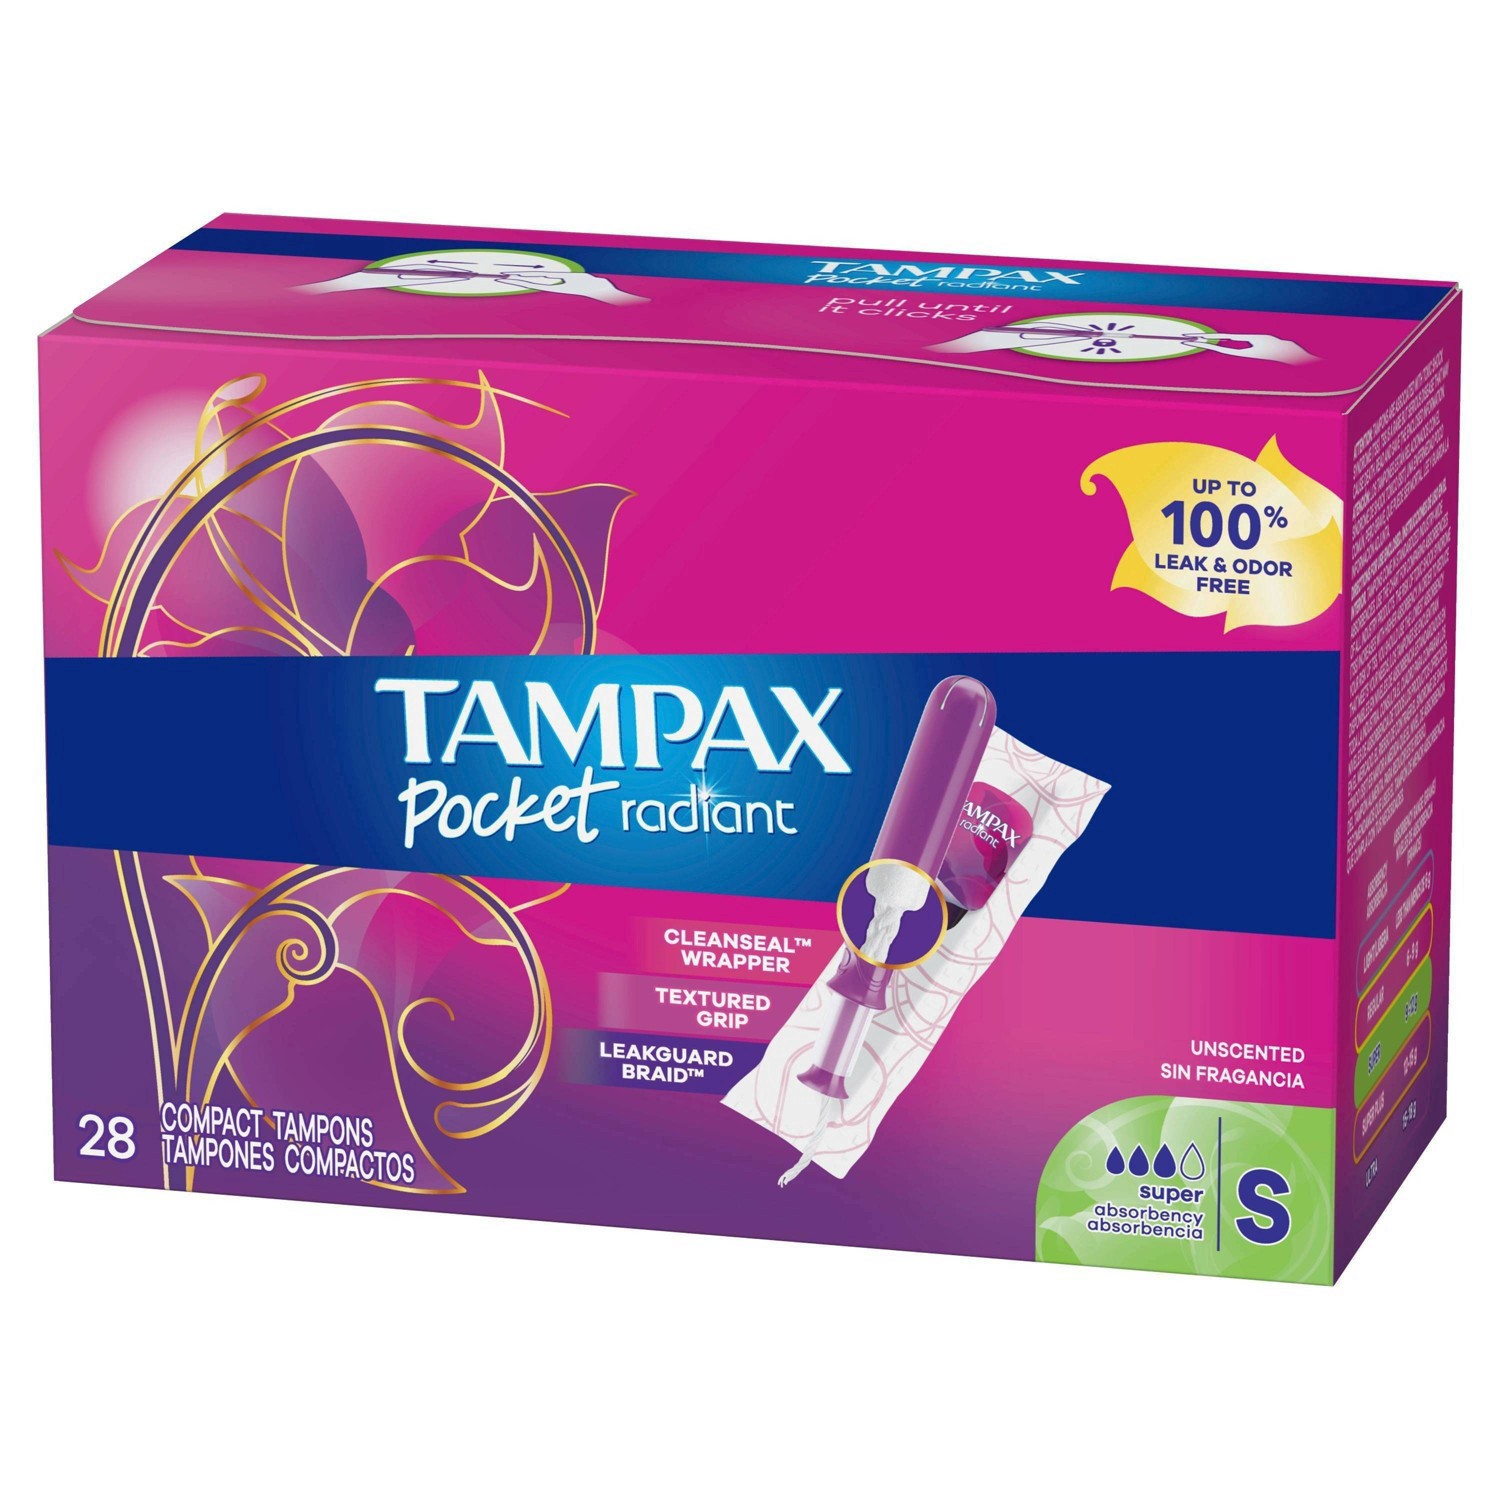 slide 41 of 94, Tampax Pocket Radiant Compact Plastic Tampons, With LeakGuard Braid, Super Absorbency, Unscented, 28 Count, 28 ct